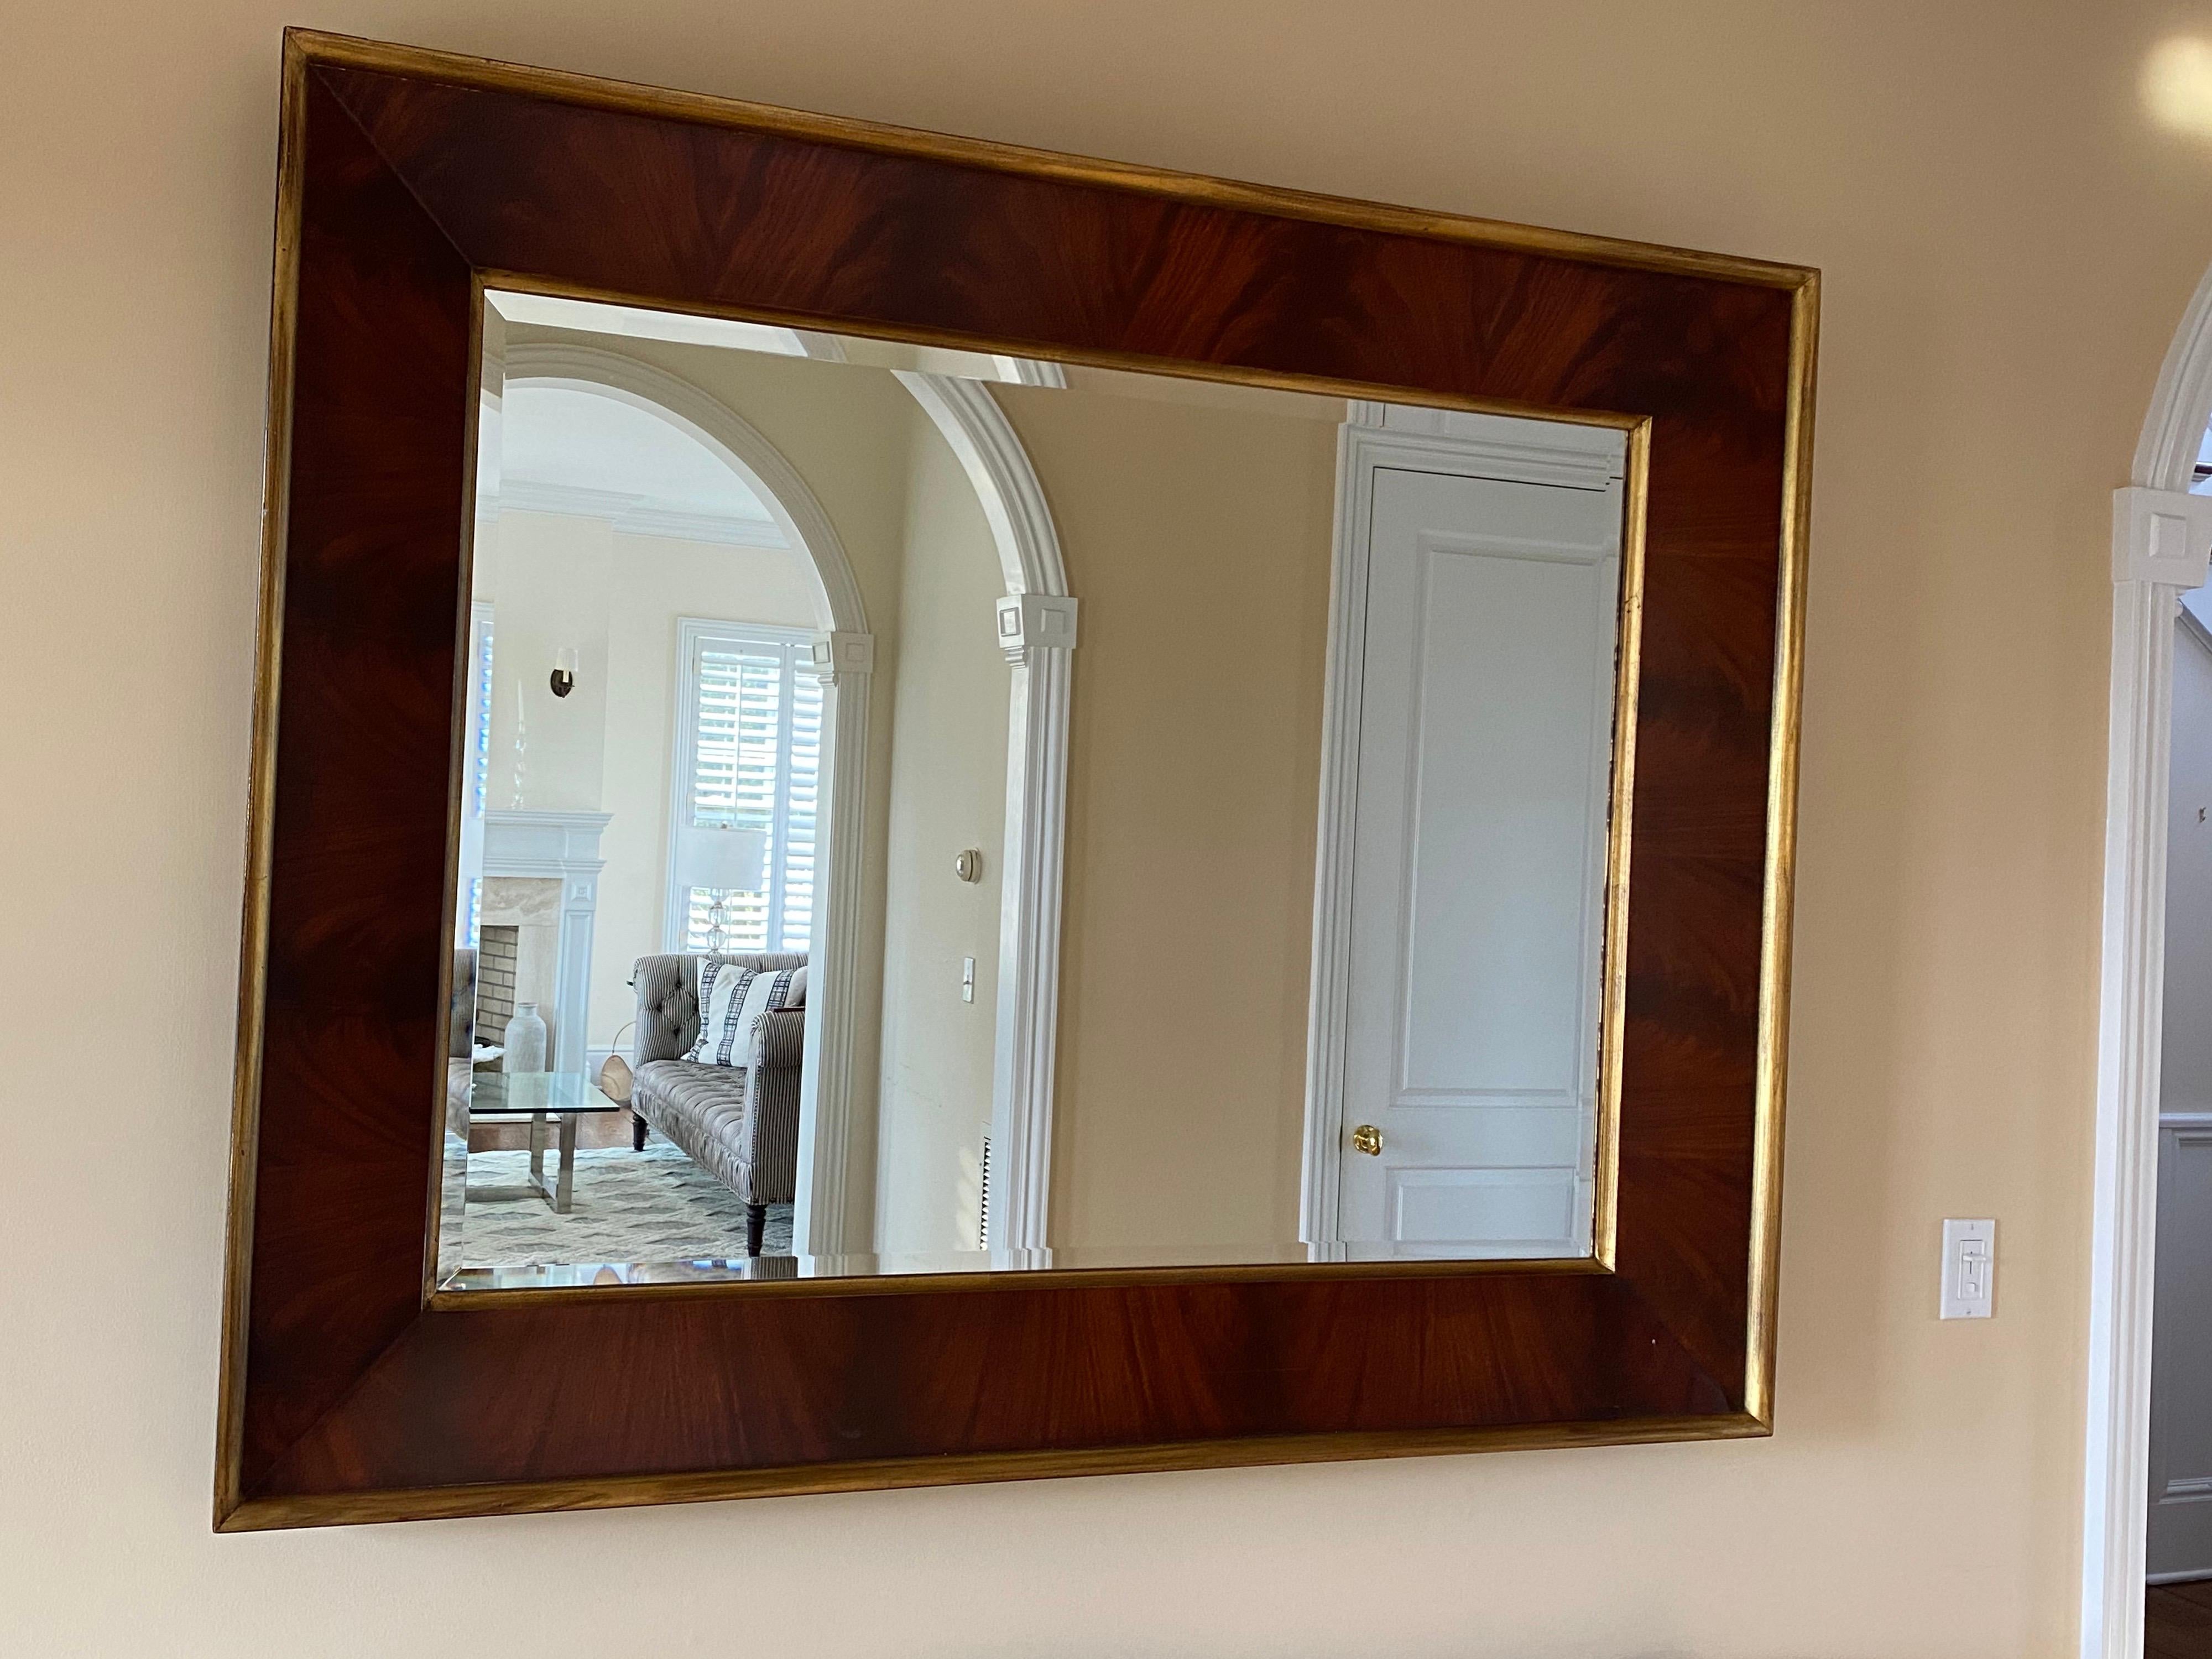 City modern oversize beveled wall mirror by Ralph Lauren. This mirror elegantly finished in a flame style mahogany wood with a double gold border. This is fit for any style home, modern, traditional or midcentury. This mirror sells for $5500 brand